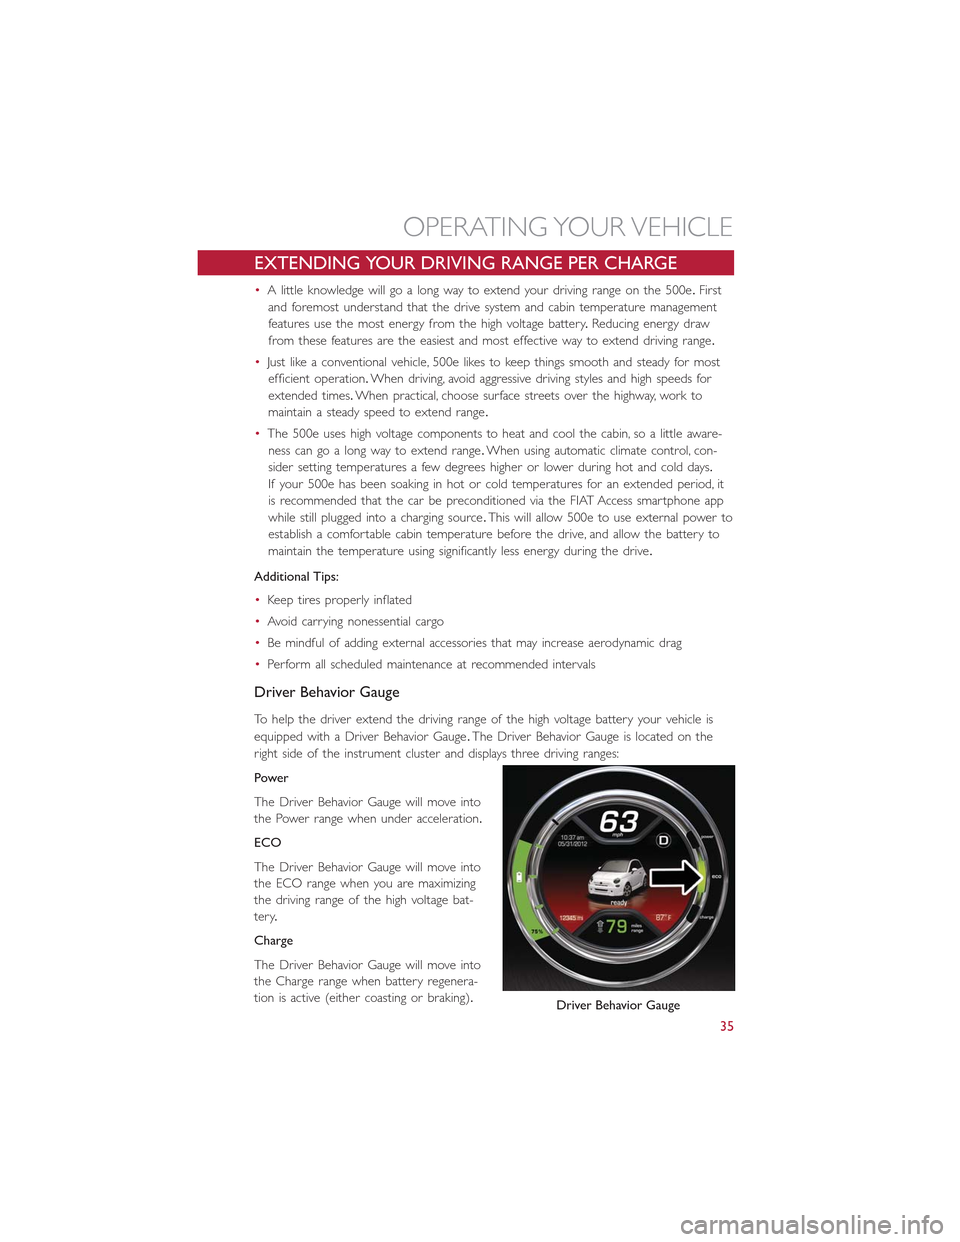 FIAT 500E 2015 2.G Owners Guide EXTENDING YOUR DRIVING RANGE PER CHARGE
•A little knowledge will go a long way to extend your driving range on the 500e.First
and foremost understand that the drive system and cabin temperature mana